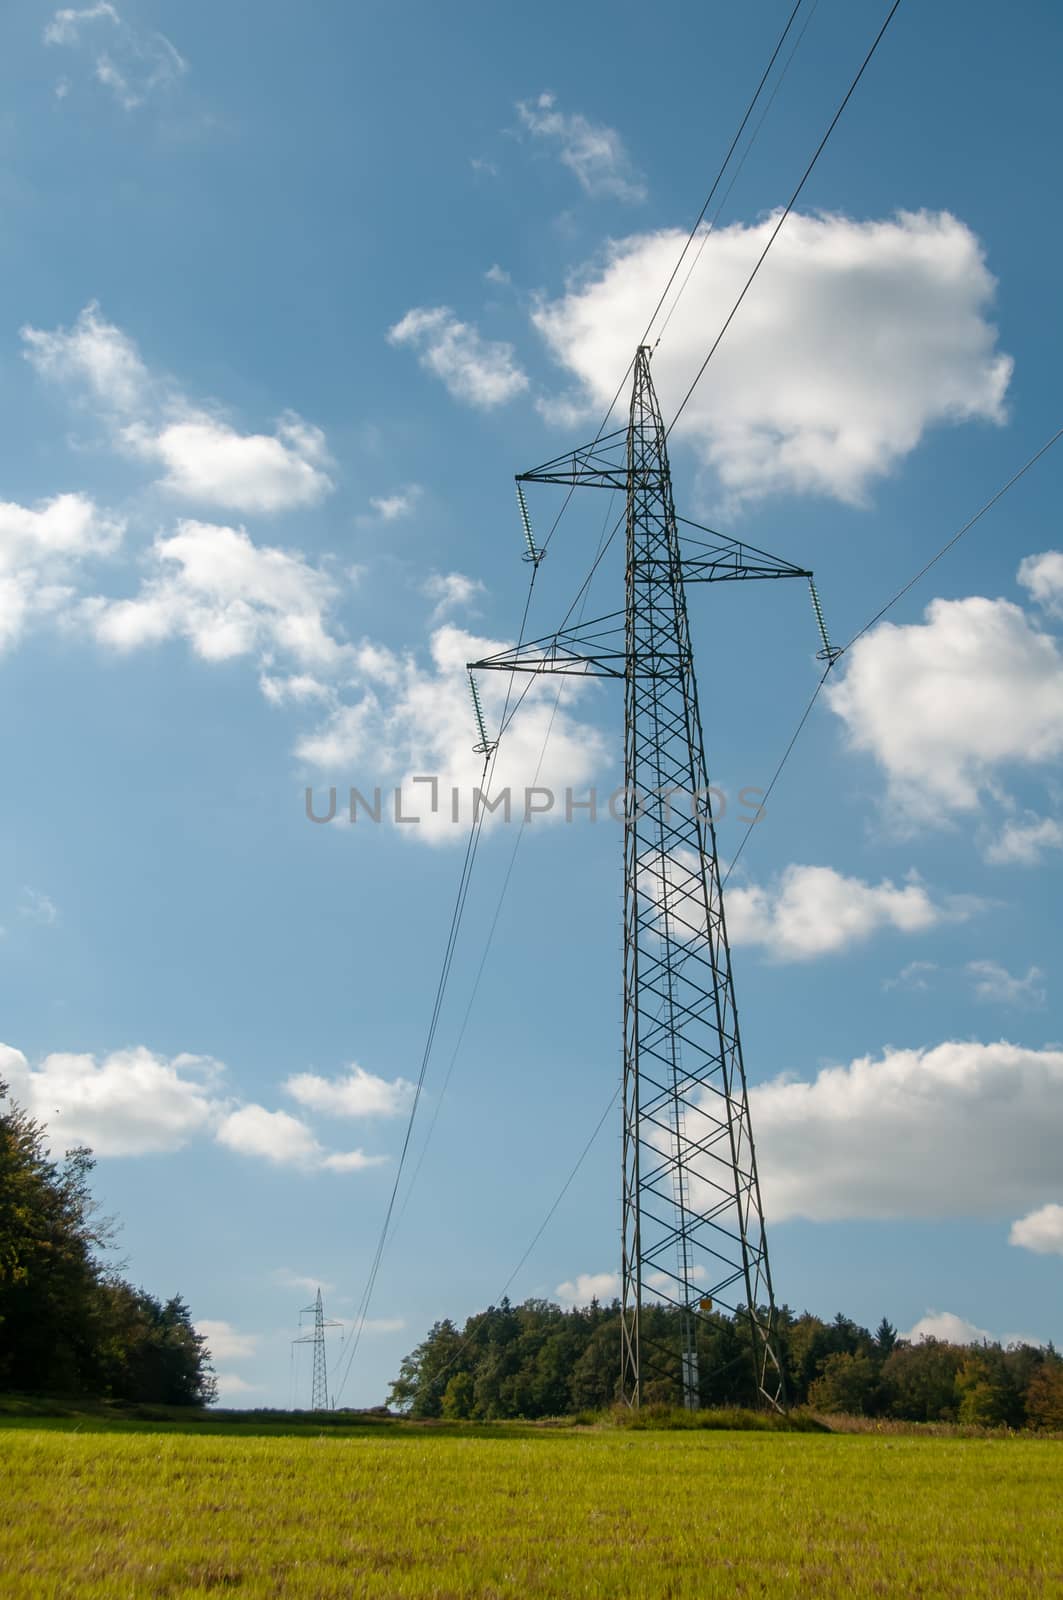 High voltage lines and power pylons innatural landscape on blue sky with puffy clouds, cology concept